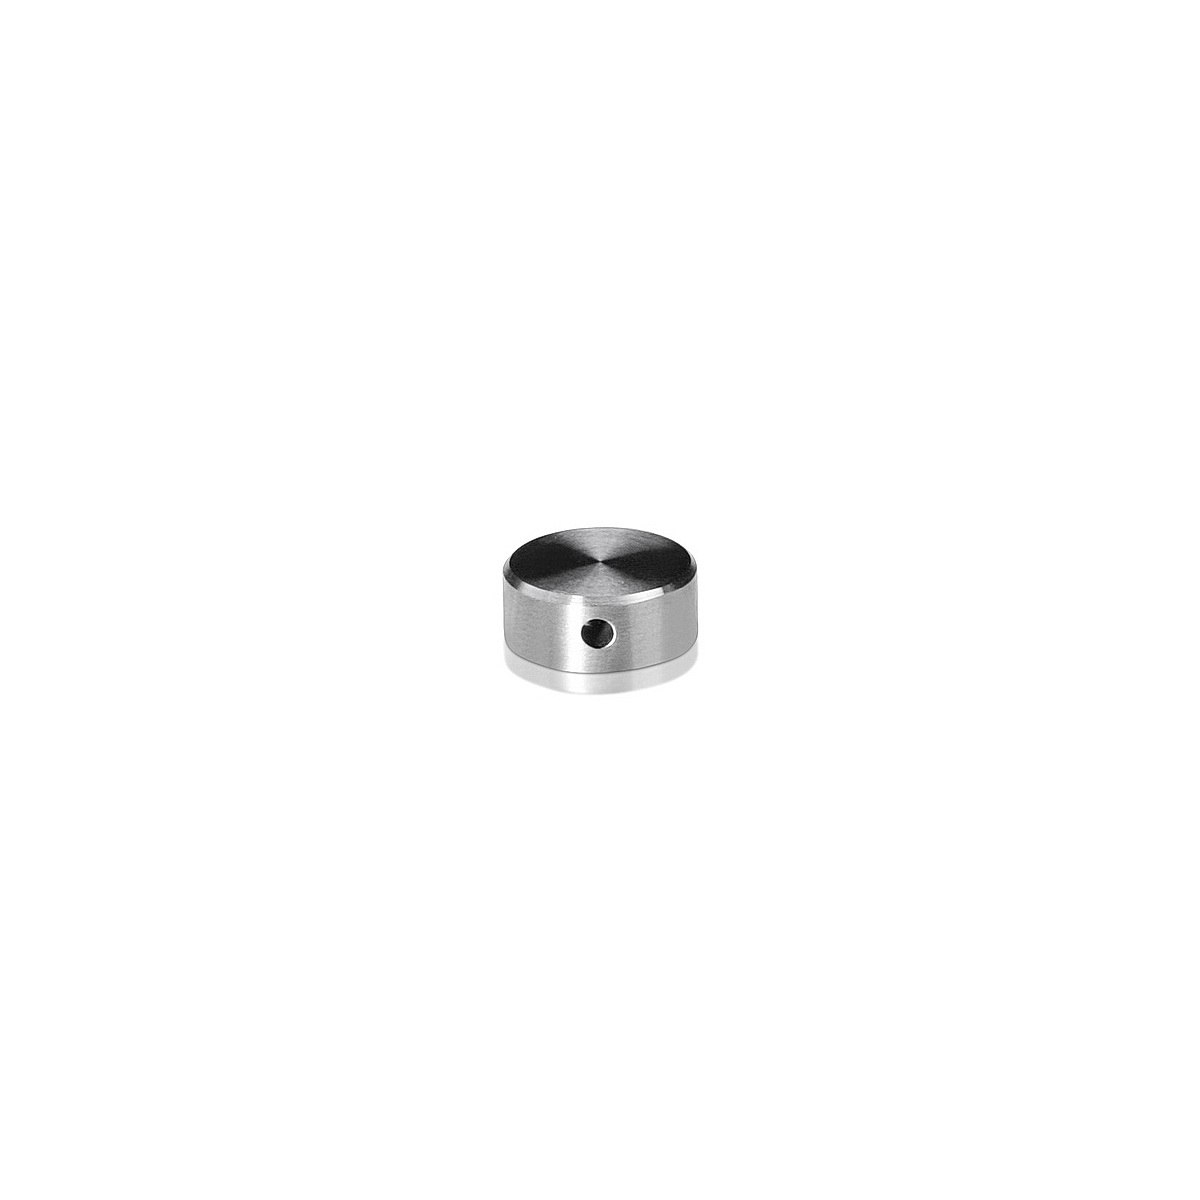 1/4-20 Threaded Locking Caps Diameter: 5/8'', Height: 1/4'', Brushed Satin Stainless Steel Grade 304 [Required Material Hole Size: 5/16'']